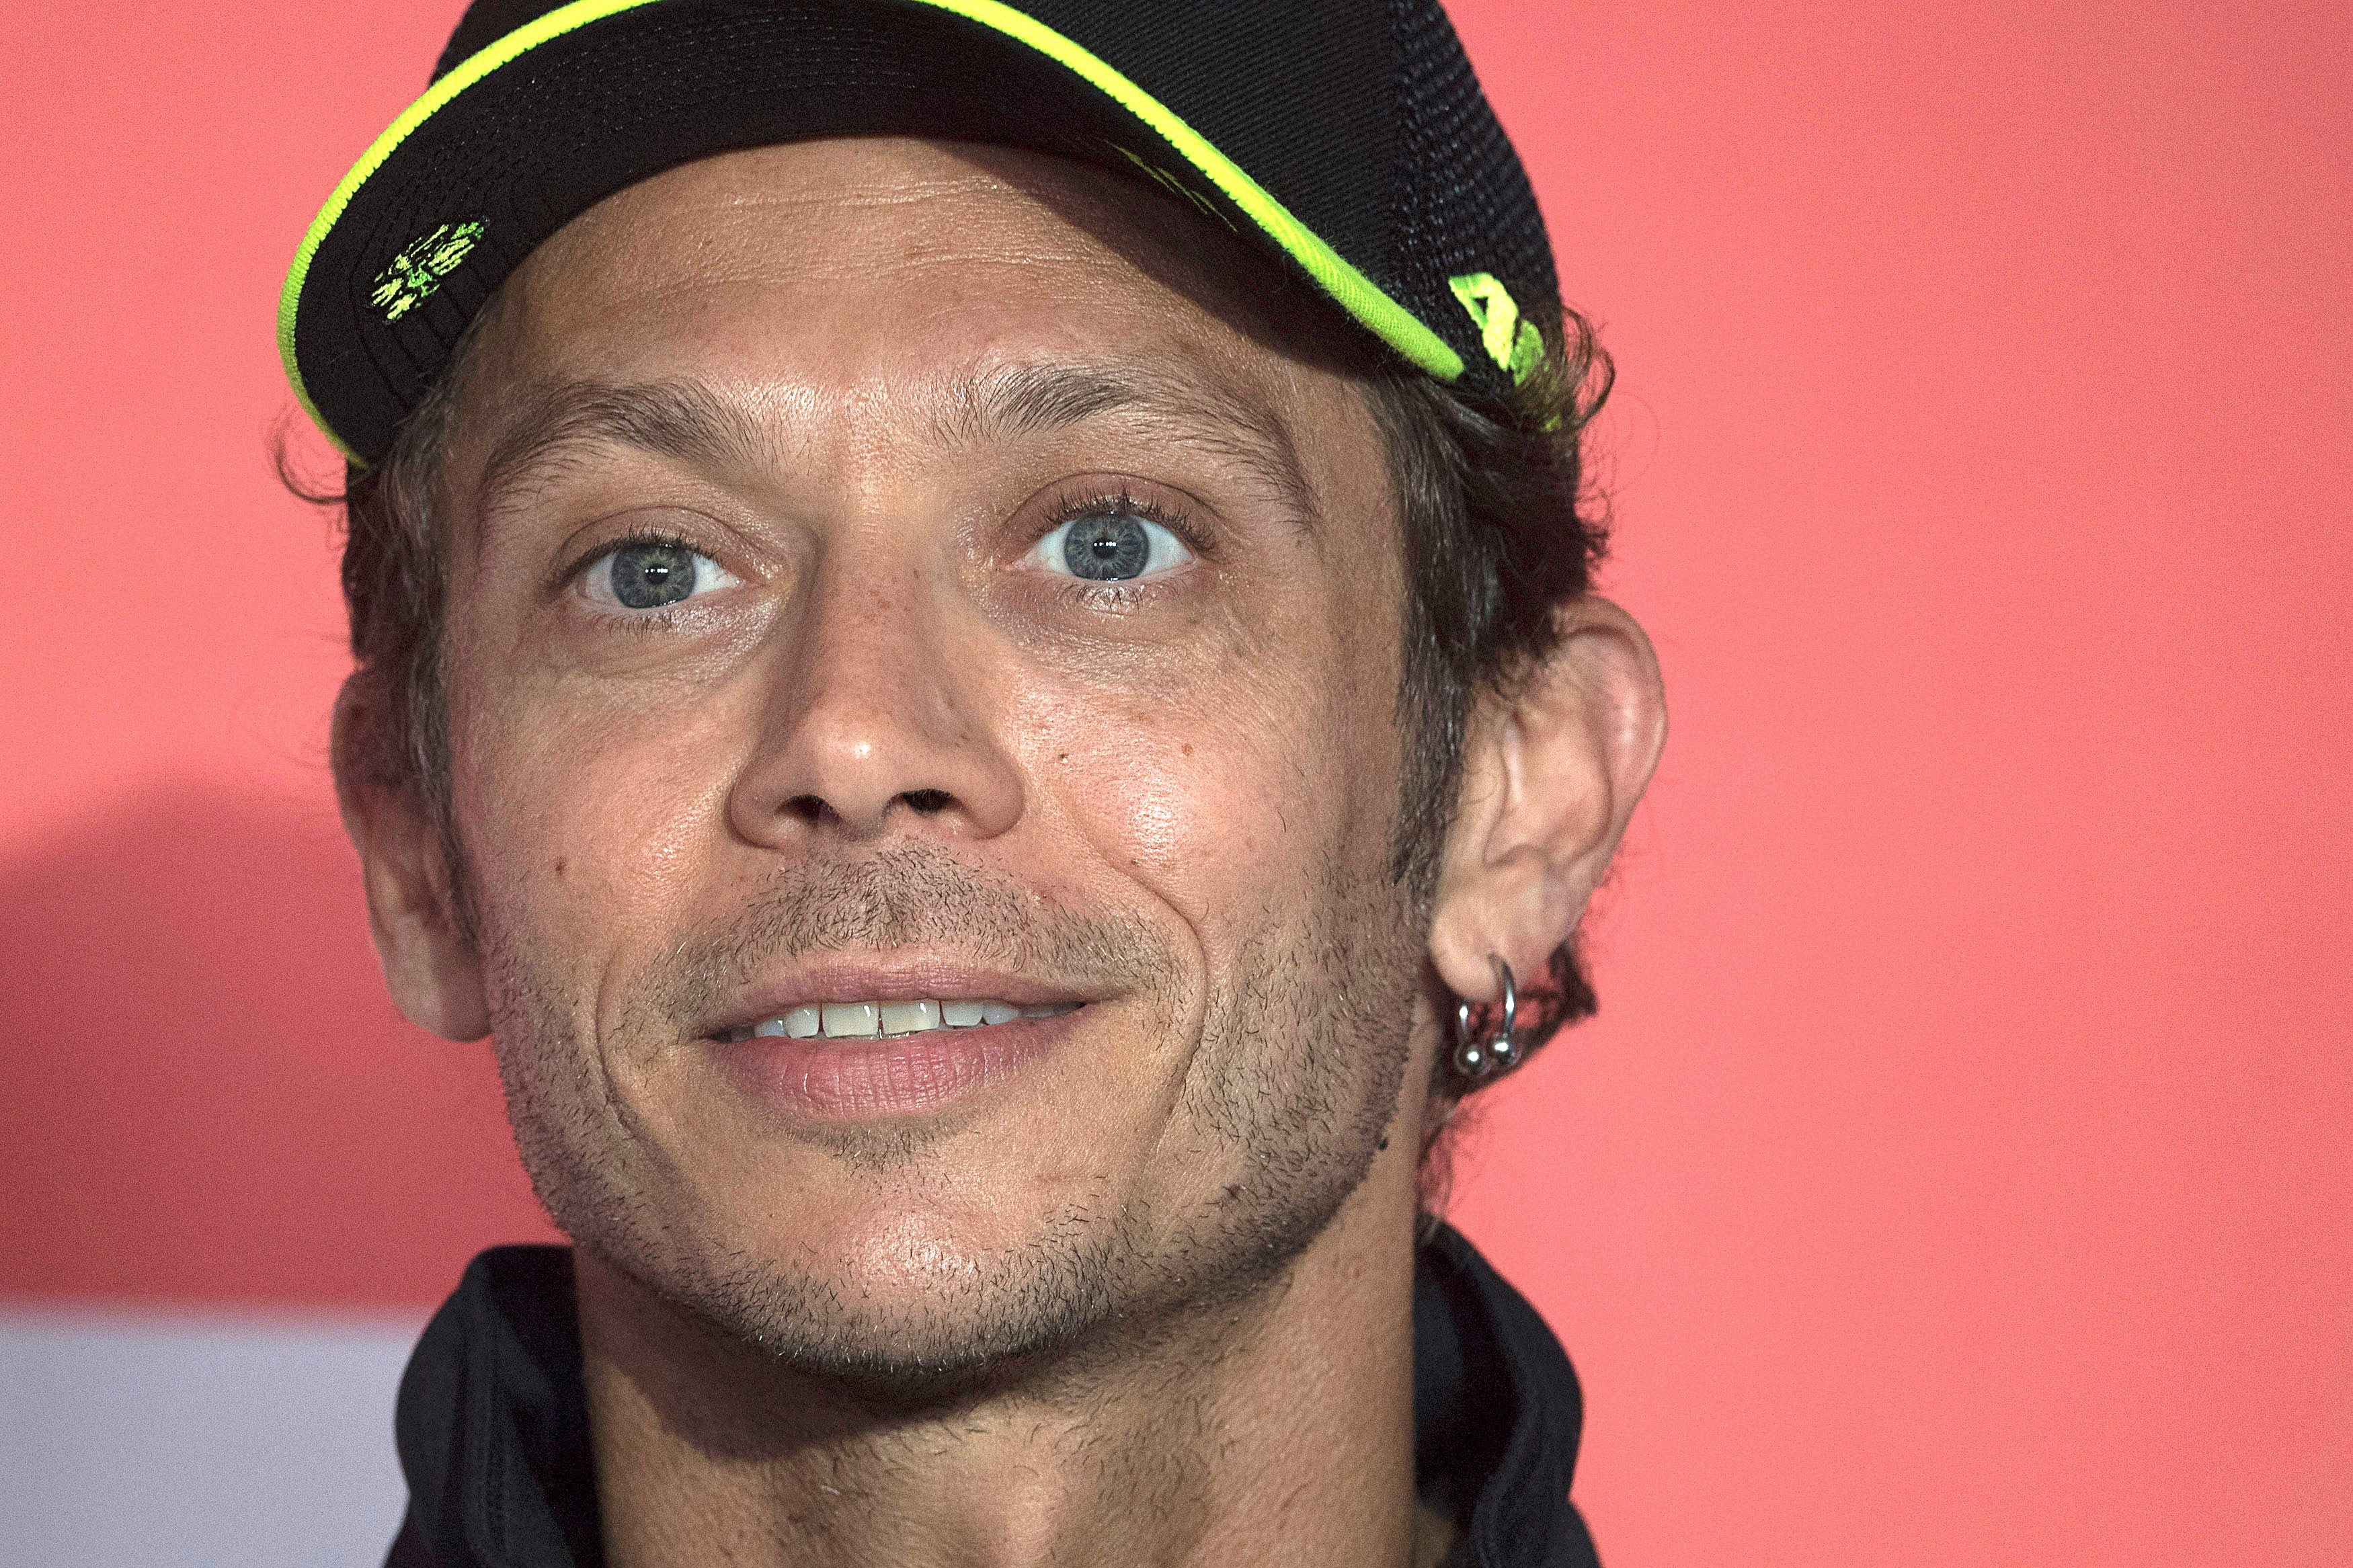 Motorcycling great Valentino Rossi retiring at end of year